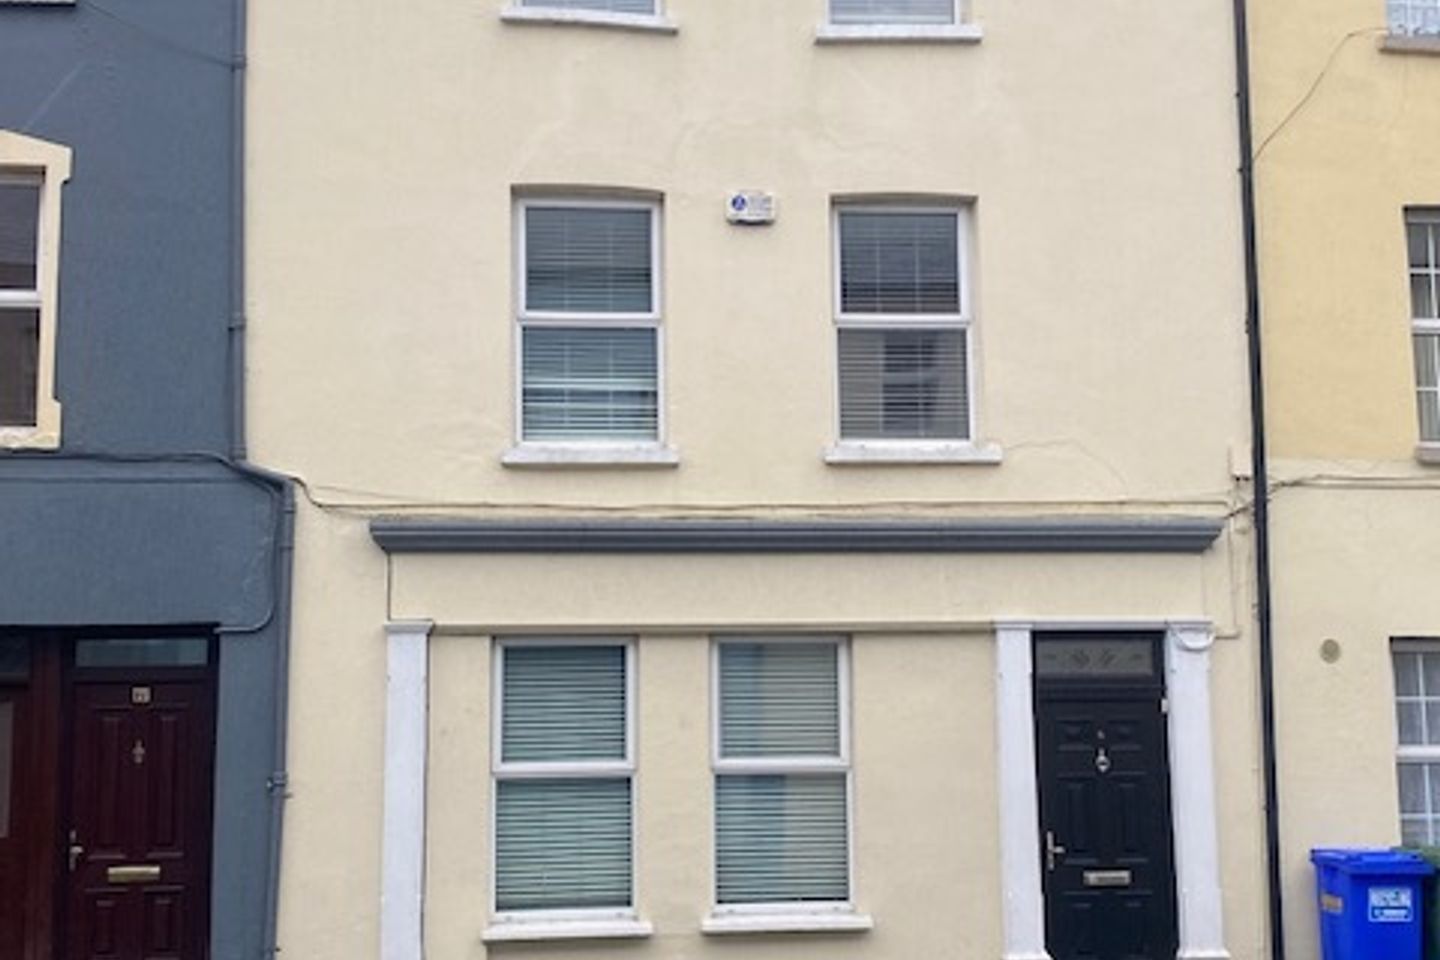 6 James Street, Tipperary Town, Co. Tipperary, E34PY94